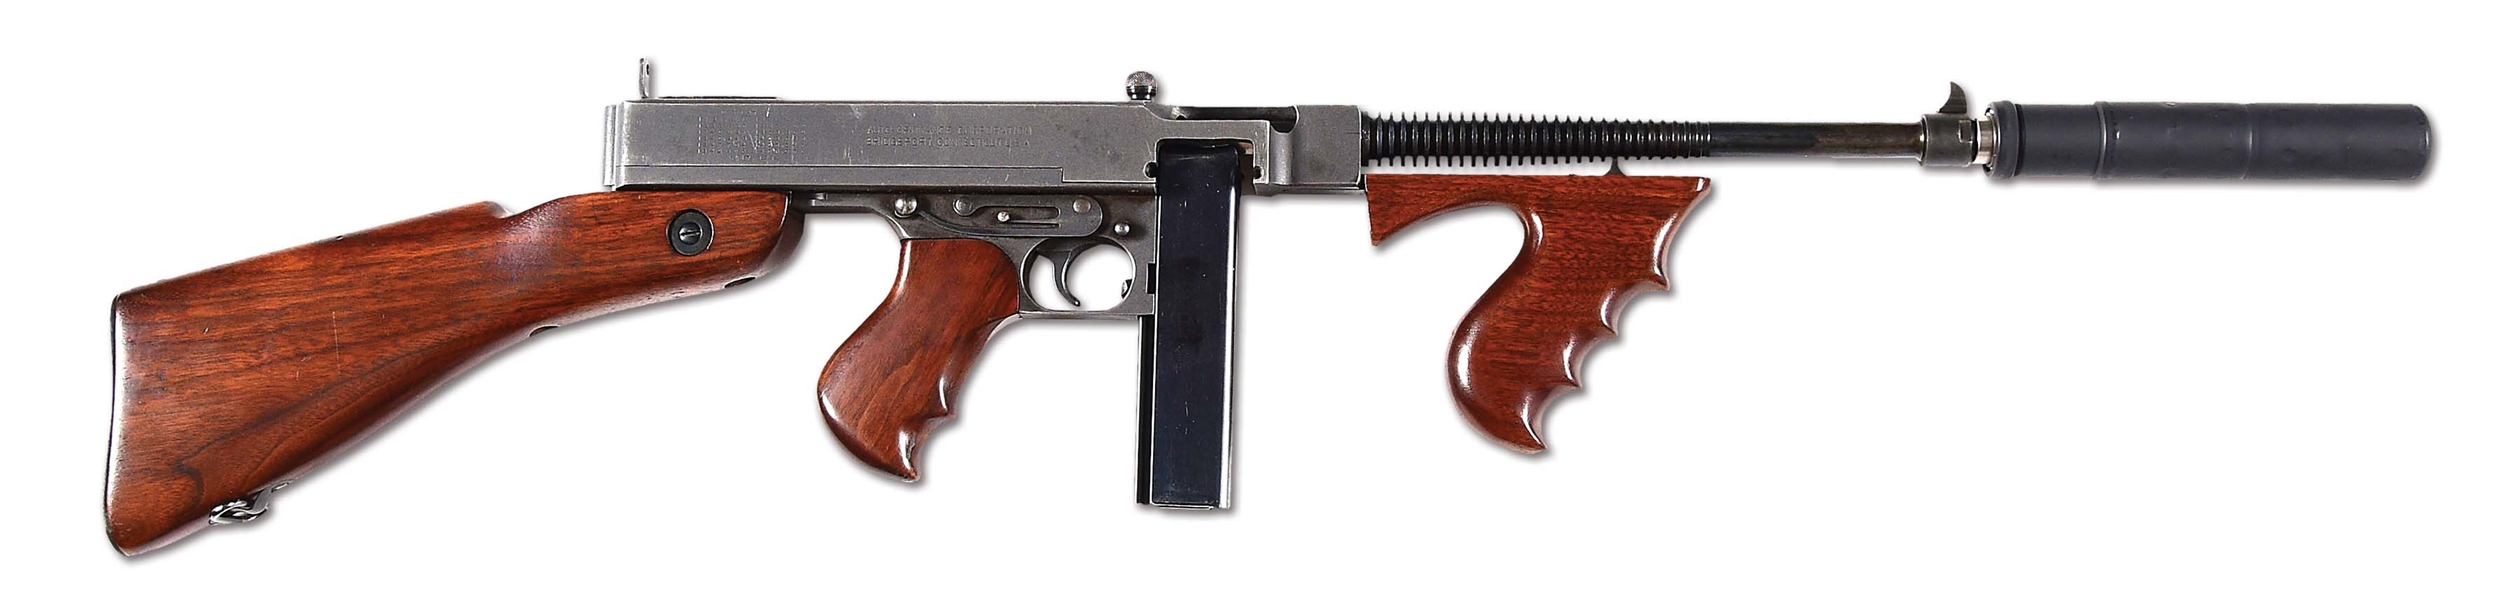 (N) AUTO ORDNANCE BRIDGEPORT 1928 THOMPSON SPECIALLY FITTED WITH CUSTOM MADE FRONT SIGHT AND KNIGHT’S ARMAMENT SILENCER (CURIO & RELIC).